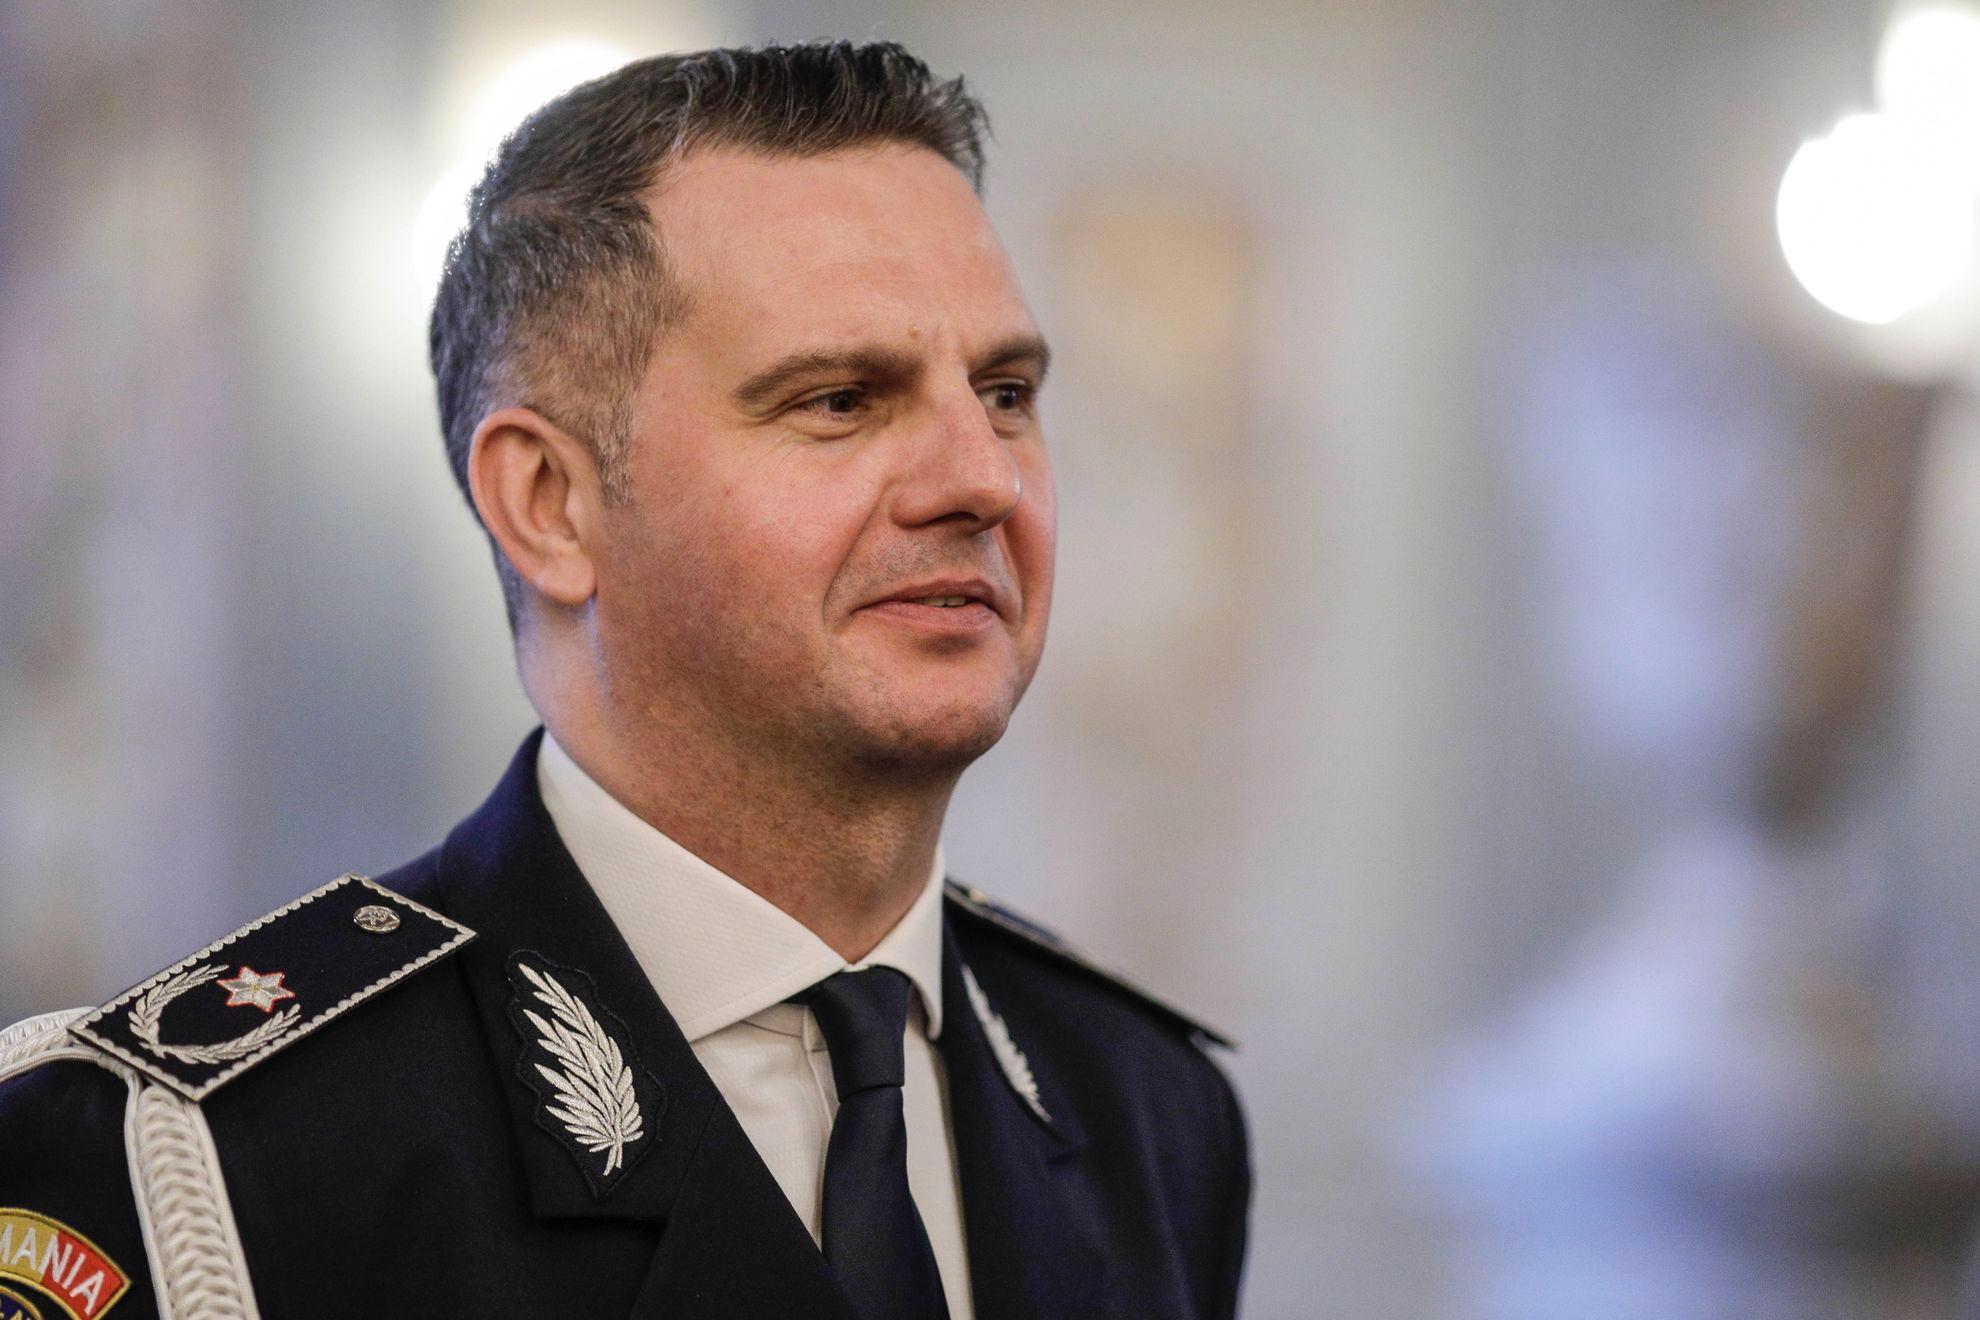 Chestor Bogdan Berechet, head of the Bucharest Police, asked policewoman Adriana Răvaș to send him the screenshot, which he then forwarded to five other Romanian Police officers. PHOTO: OCTAV GANEA, Inquam Photos.